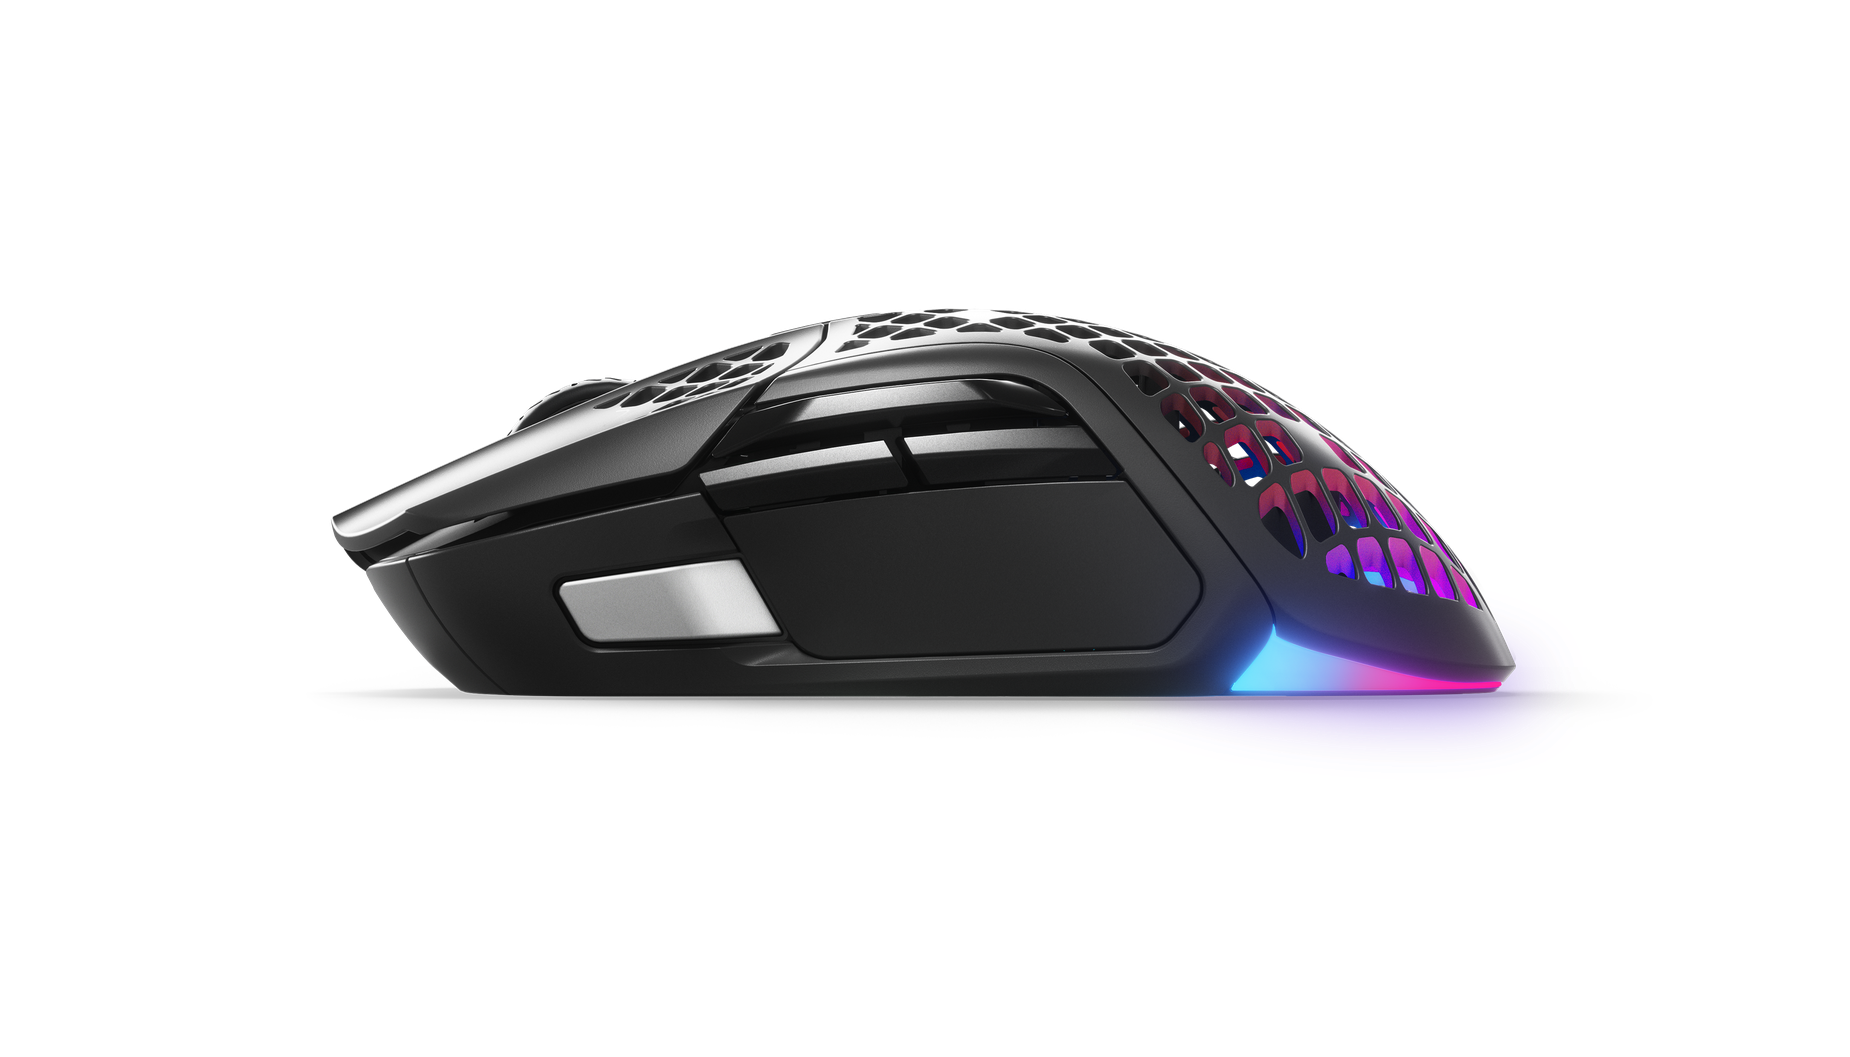 
 A side view of the Aerox 5 Wireless mouse showing off its numerous buttons.
 